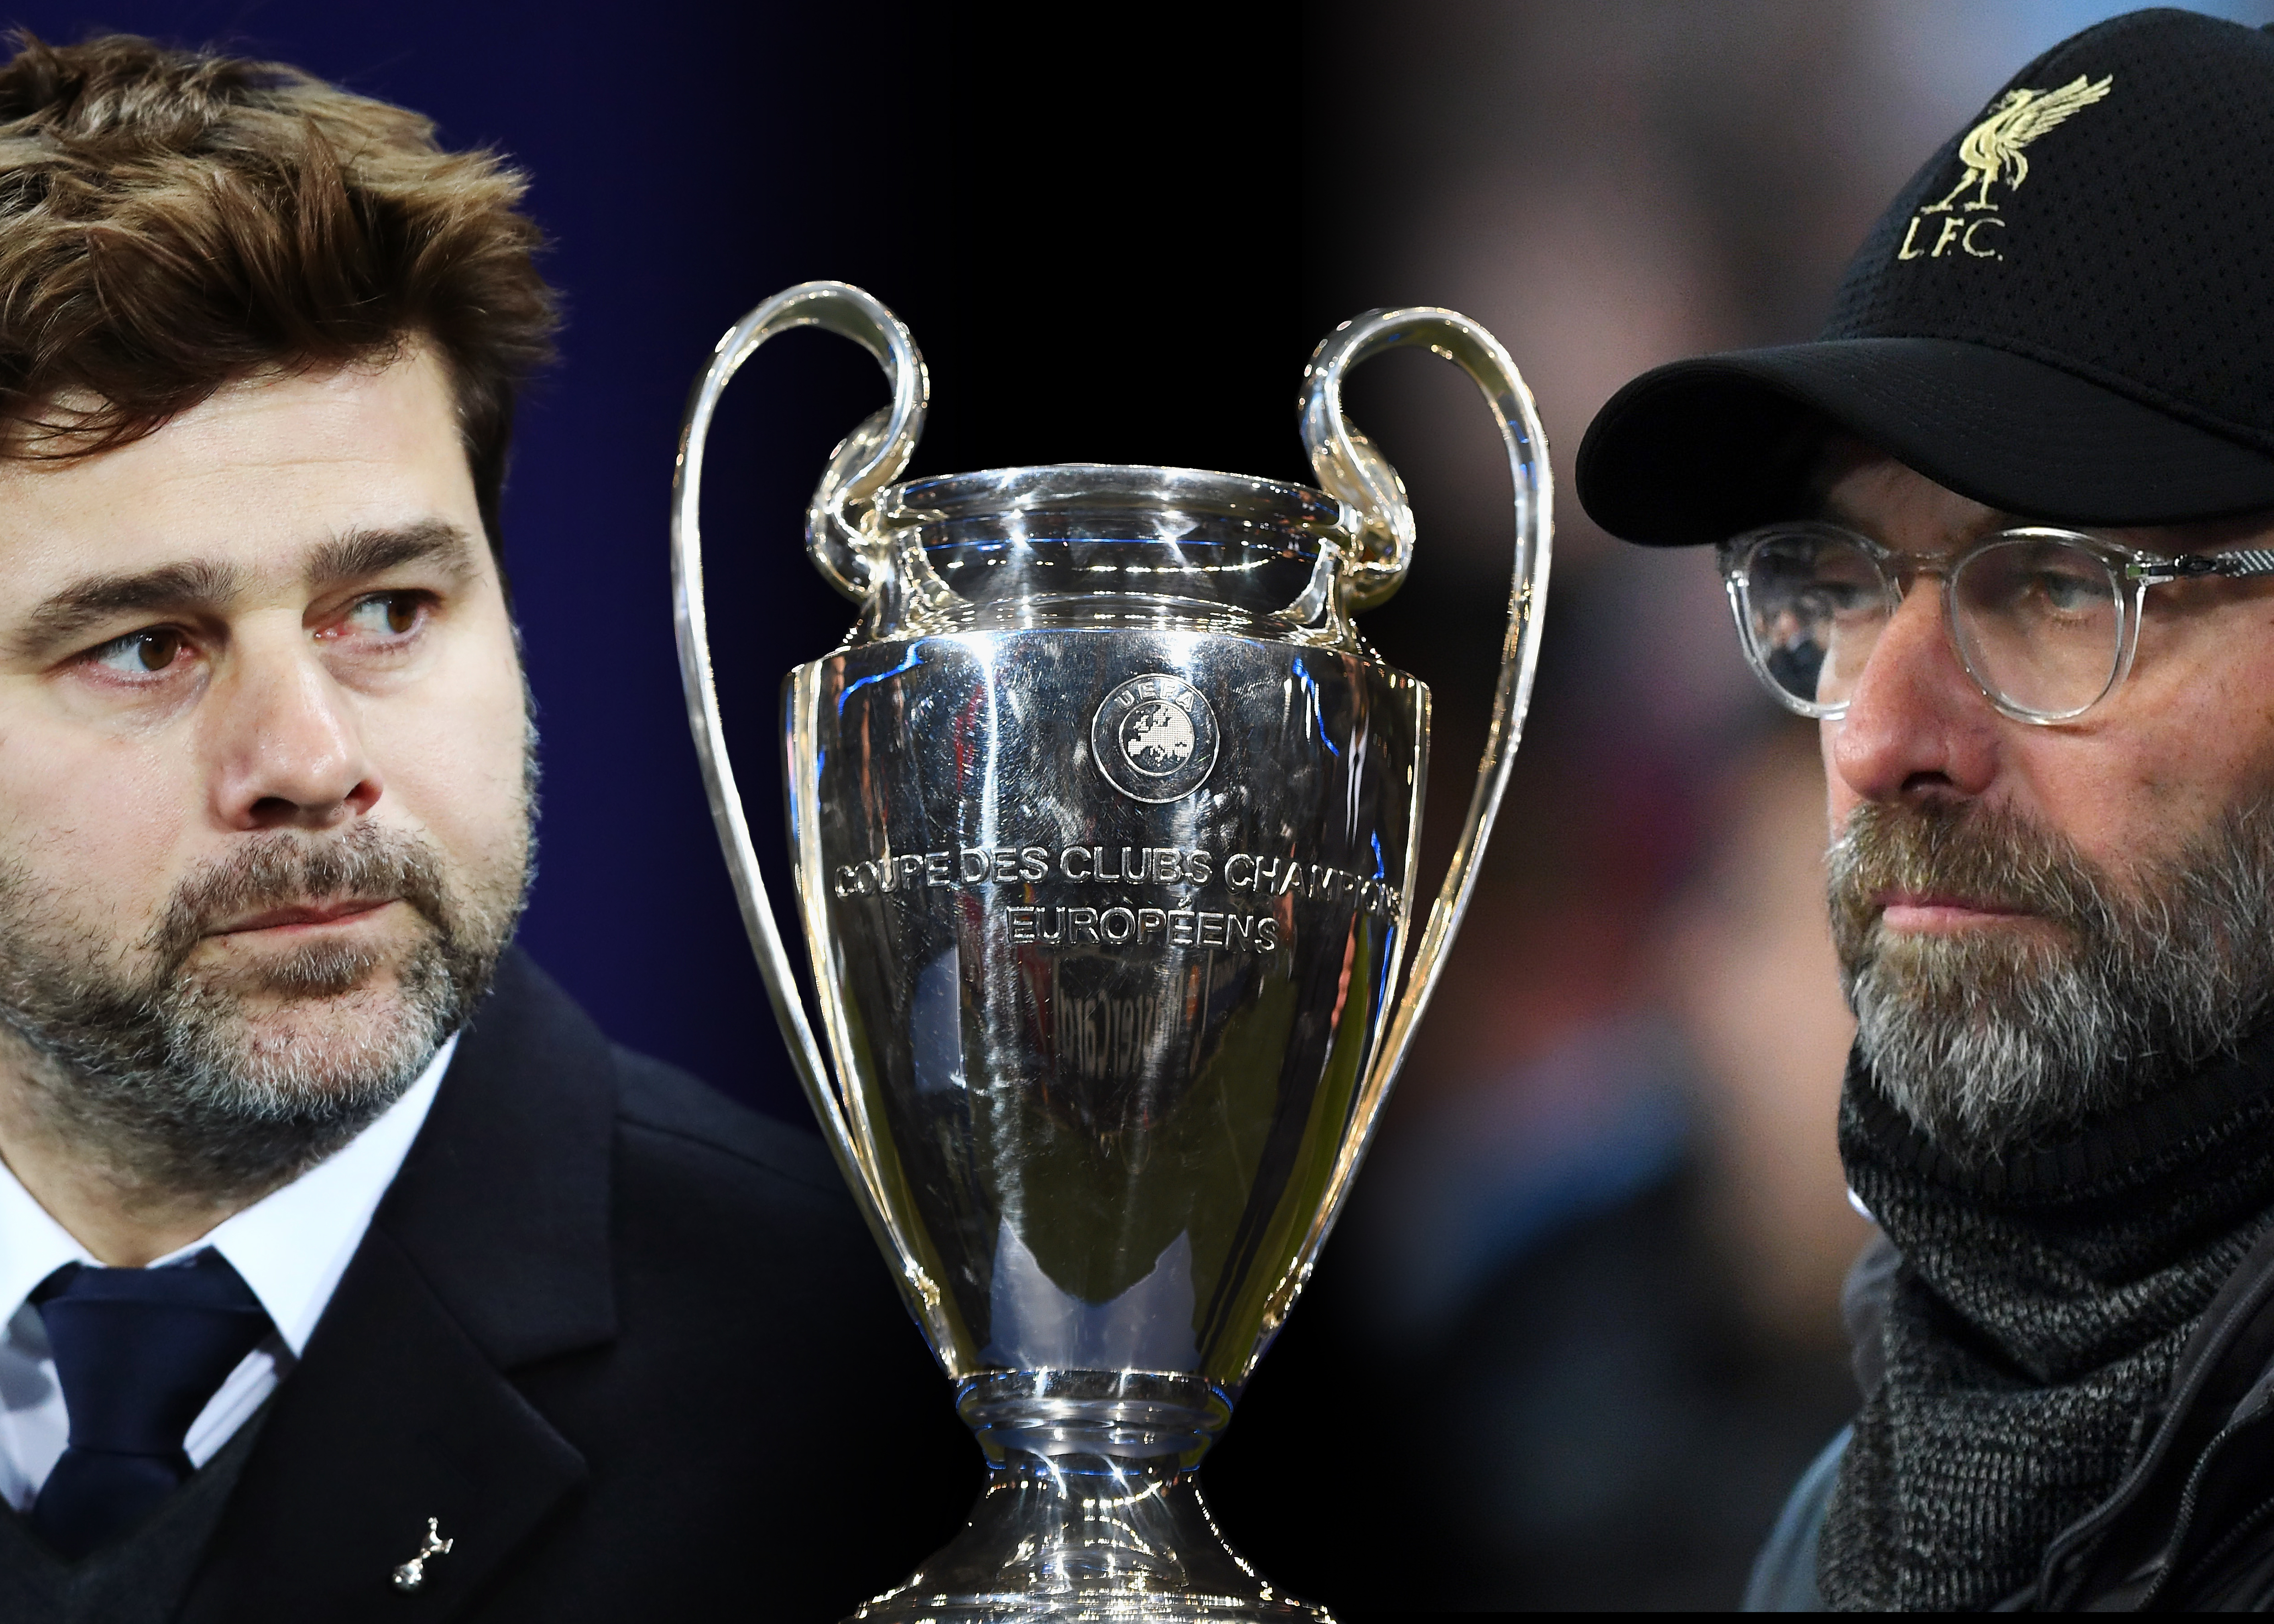 FILE PHOTO (EDITORS NOTE: COMPOSITE OF IMAGES - Image numbers 887122058,464313758,1076708990 - GRADIENT ADDED) In this composite image a comparison has been made between Mauricio Pochettino, Manager of Tottenham Hotspur (L) and Jurgen Klopp, Manager of Liverpool . Tottenham Hotspur and Liverpool meet in the UEFA Champions League Final at the Estadio Wanda Metropolitano on June 1, 2019 in Madrid,Spain.  ***LEFT IMAGE*** LONDON, ENGLAND - DECEMBER 06: Mauricio Pochettino, Manager of Tottenham Hotspur looks on prior to the UEFA Champions League group H match between Tottenham Hotspur and APOEL Nicosia at Wembley Stadium on December 6, 2017 in London, United Kingdom. (Photo by Julian Finney/Getty Images) ***CENTRE IMAGE*** MANCHESTER, ENGLAND - FEBRUARY 24: The Champions league trophy is seen prior to the UEFA Champions League Round of 16 match between Manchester City and Barcelona at Etihad Stadium on February 24, 2015 in Manchester, United Kingdom. (Photo by Laurence Griffiths/Getty Images)  ***RIGHT IMAGE***  MANCHESTER, ENGLAND - JANUARY 03: Jurgen Klopp, Manager of Liverpool looks on prior to the Premier League match between Manchester City and Liverpool FC at the Etihad Stadium on January 3, 2019 in Manchester, United Kingdom. (Photo by Shaun Botterill/Getty Images)